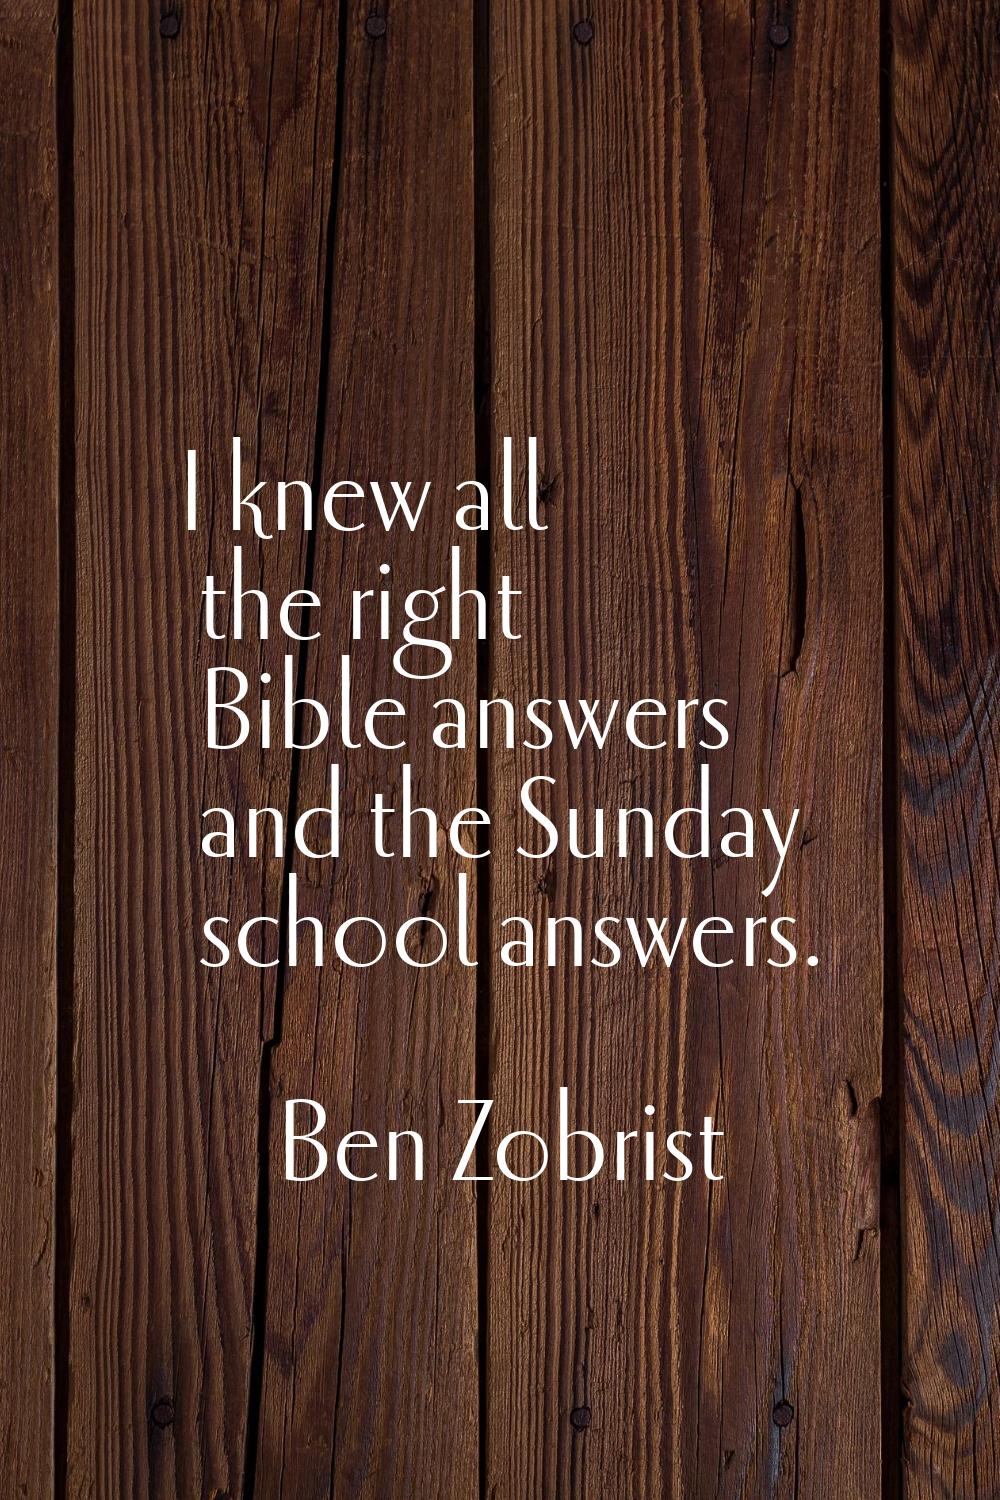 I knew all the right Bible answers and the Sunday school answers.